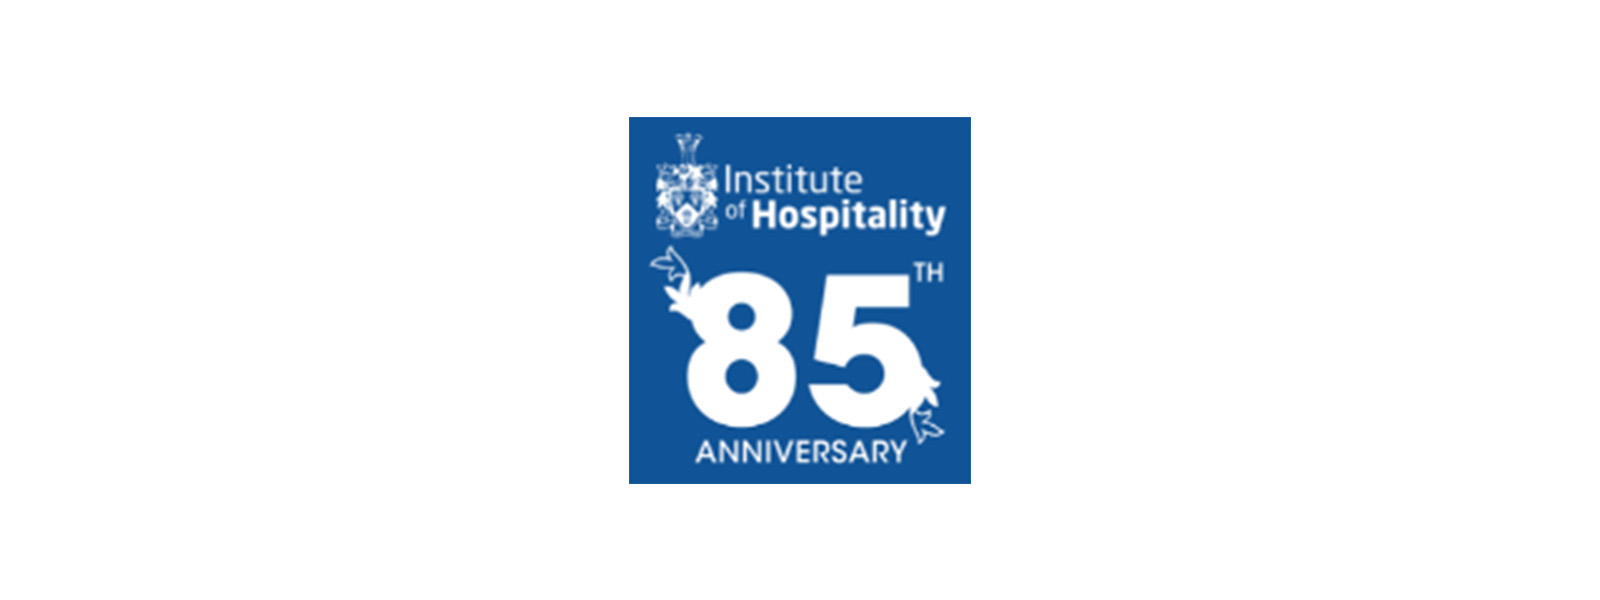 A blue square with Institute of Hospitality 85th Anniversary written inside